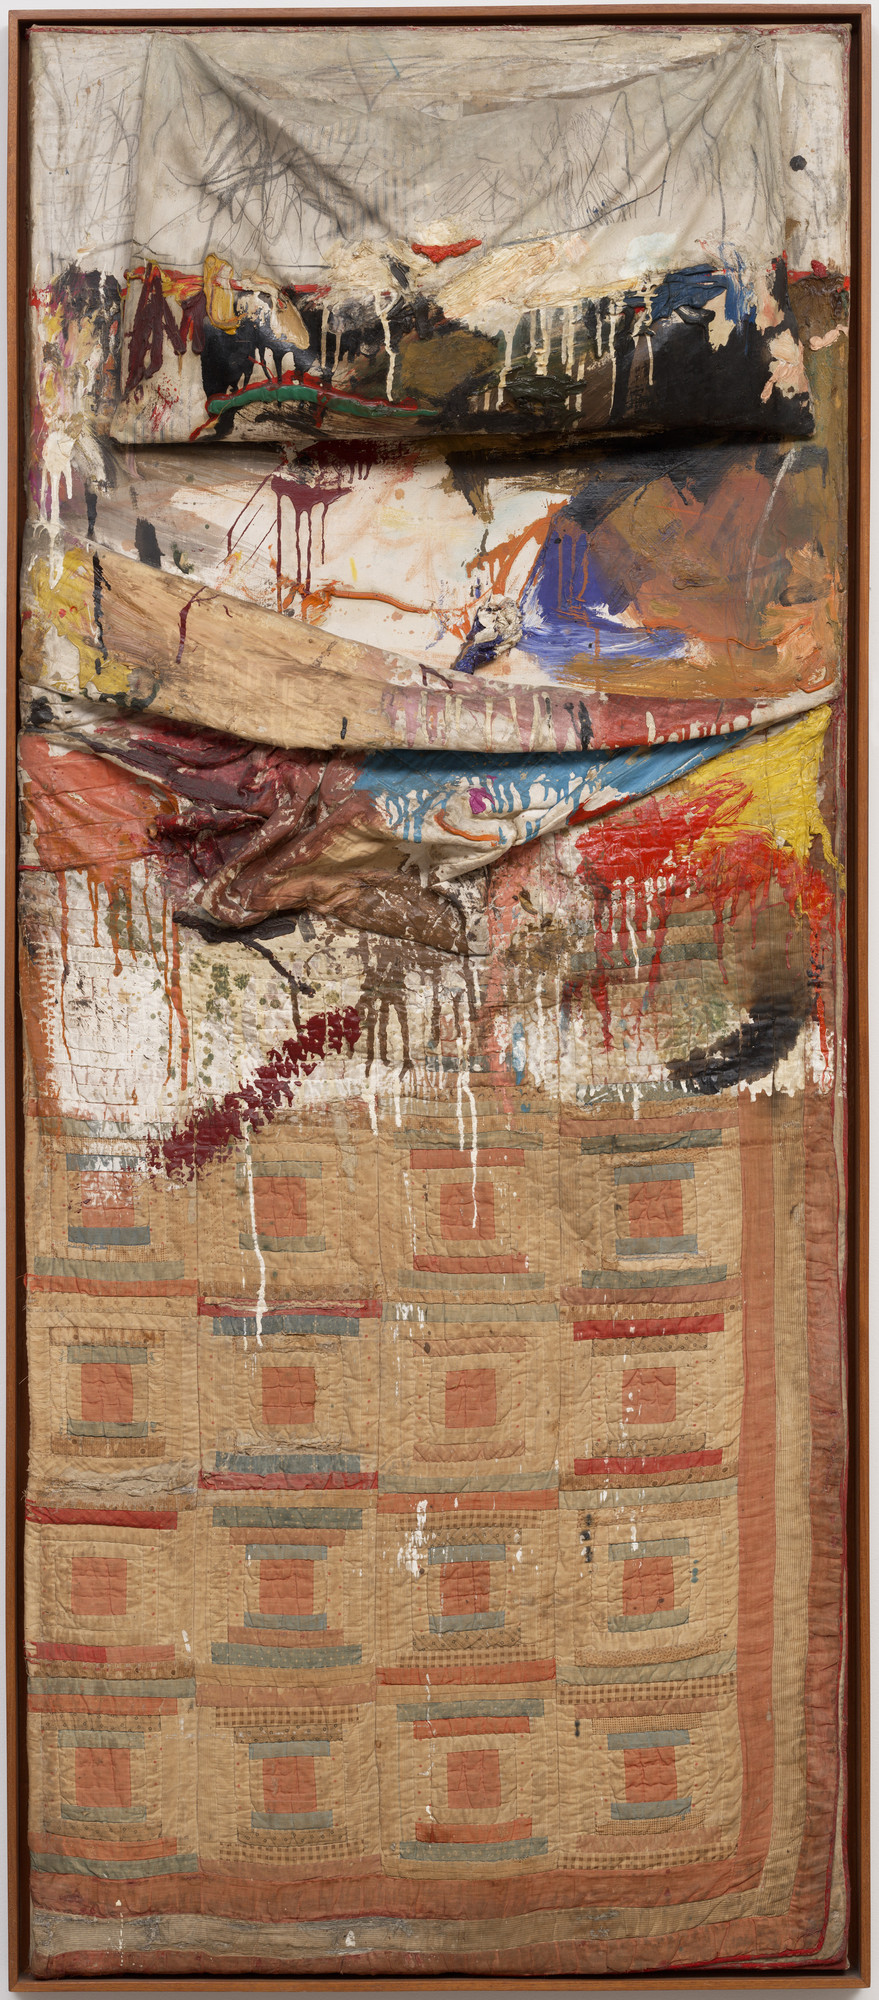 Robert Rauschenberg, Bed, 1955, oil and pencil on pillow, quilt, and sheet on wood supports, 191.1 x 80 x 20.3 cm (The Museum of Modern Art, New York)